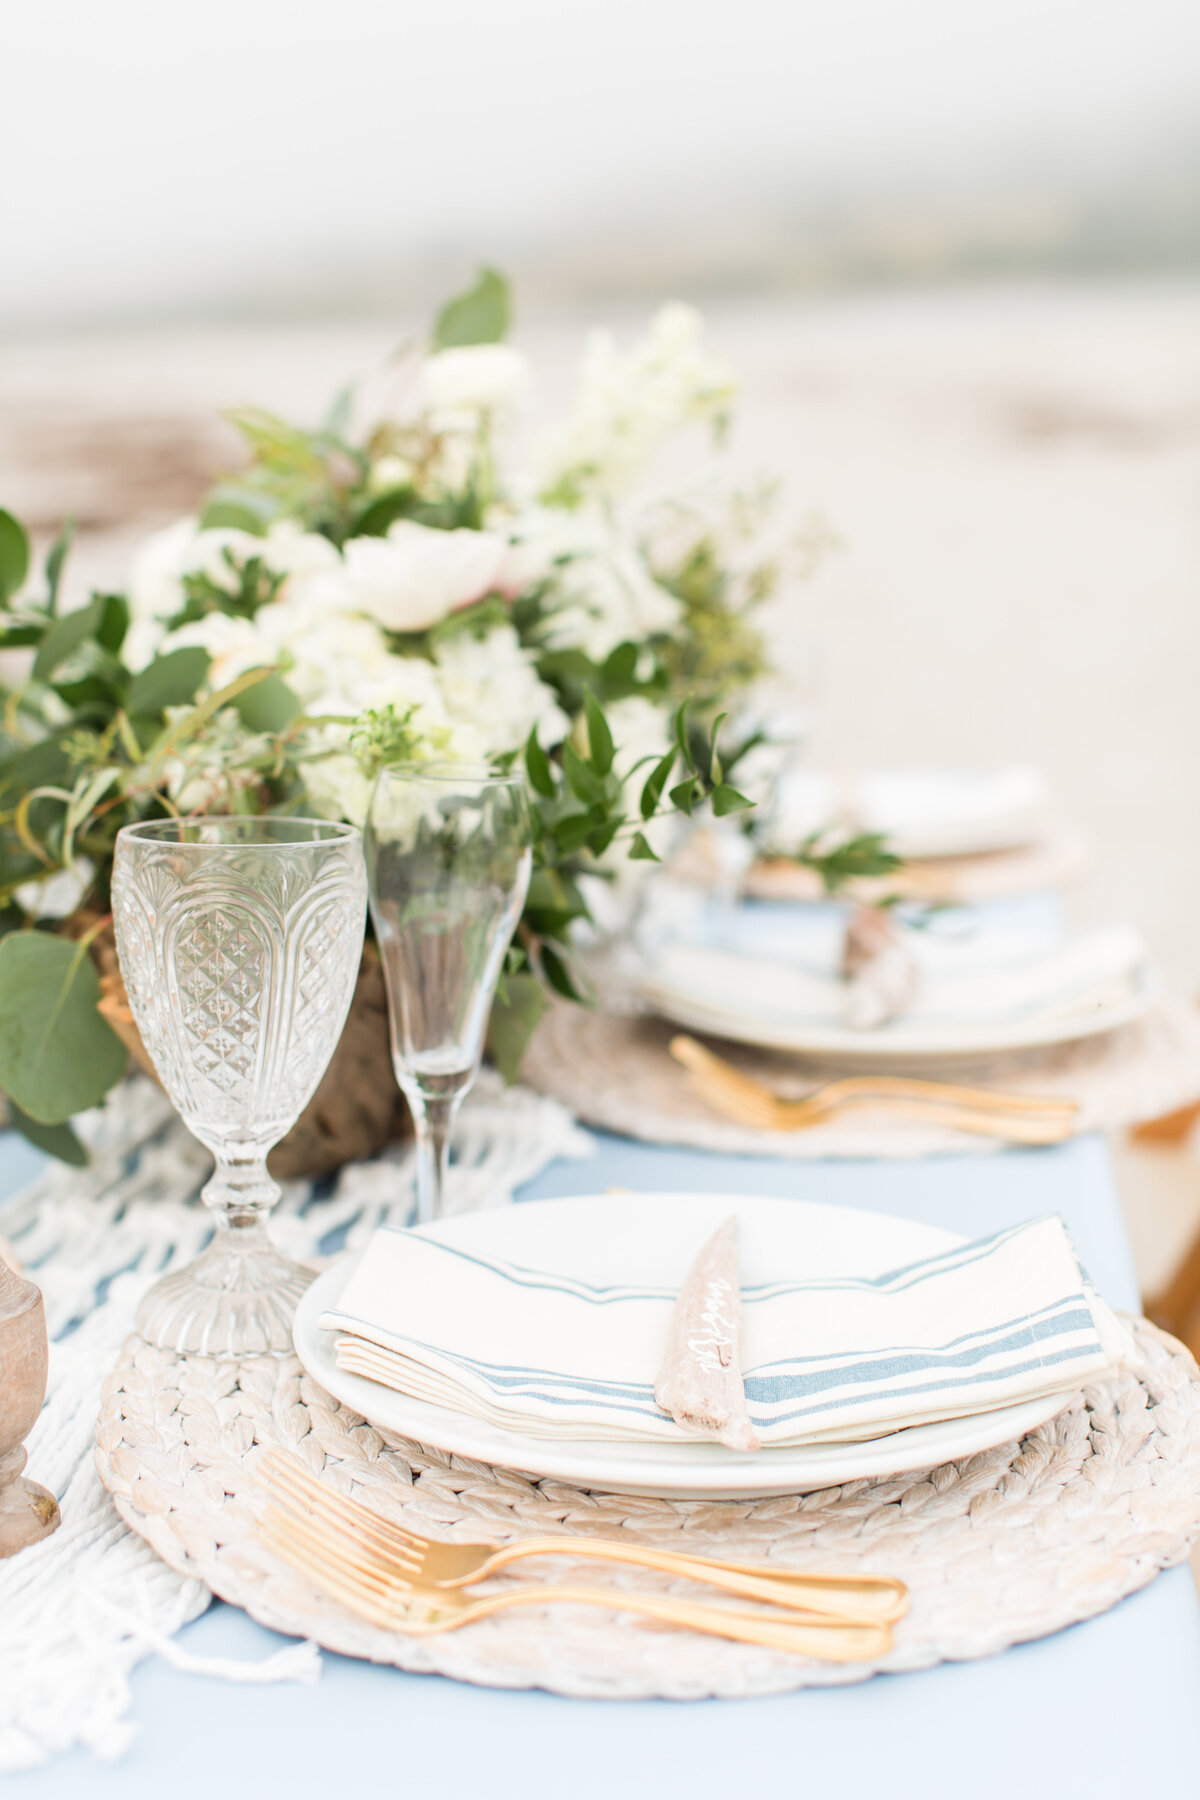 Maine coastal table scape with driftwood and greenery